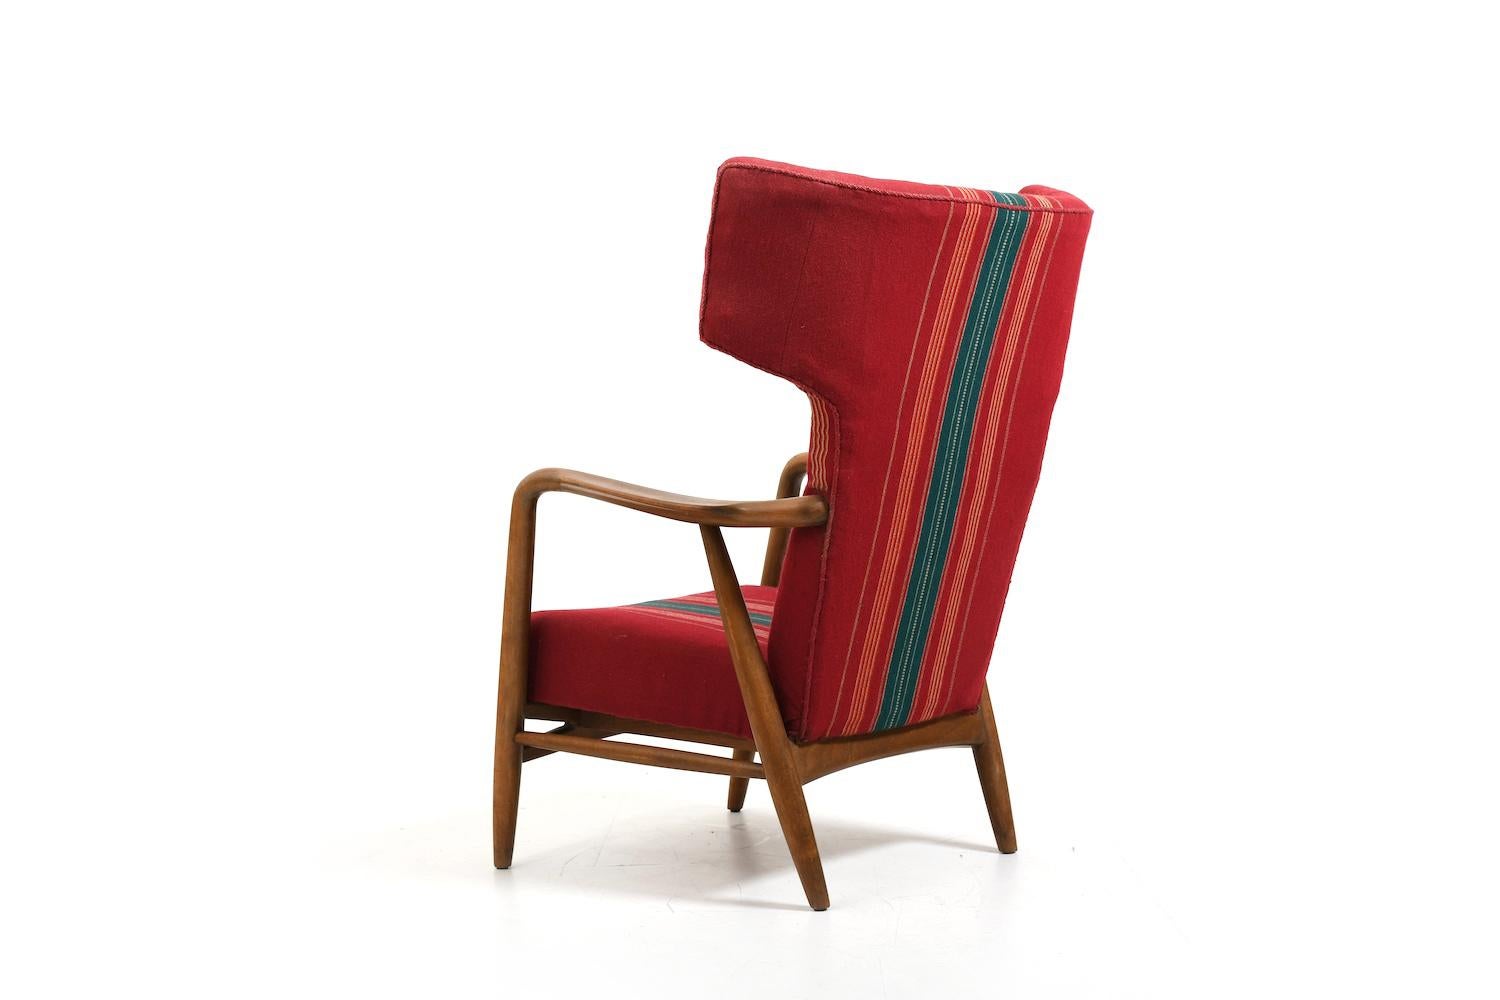 20th Century Eva & Nils Koppel Wingback Lounge Chair 1947 For Sale